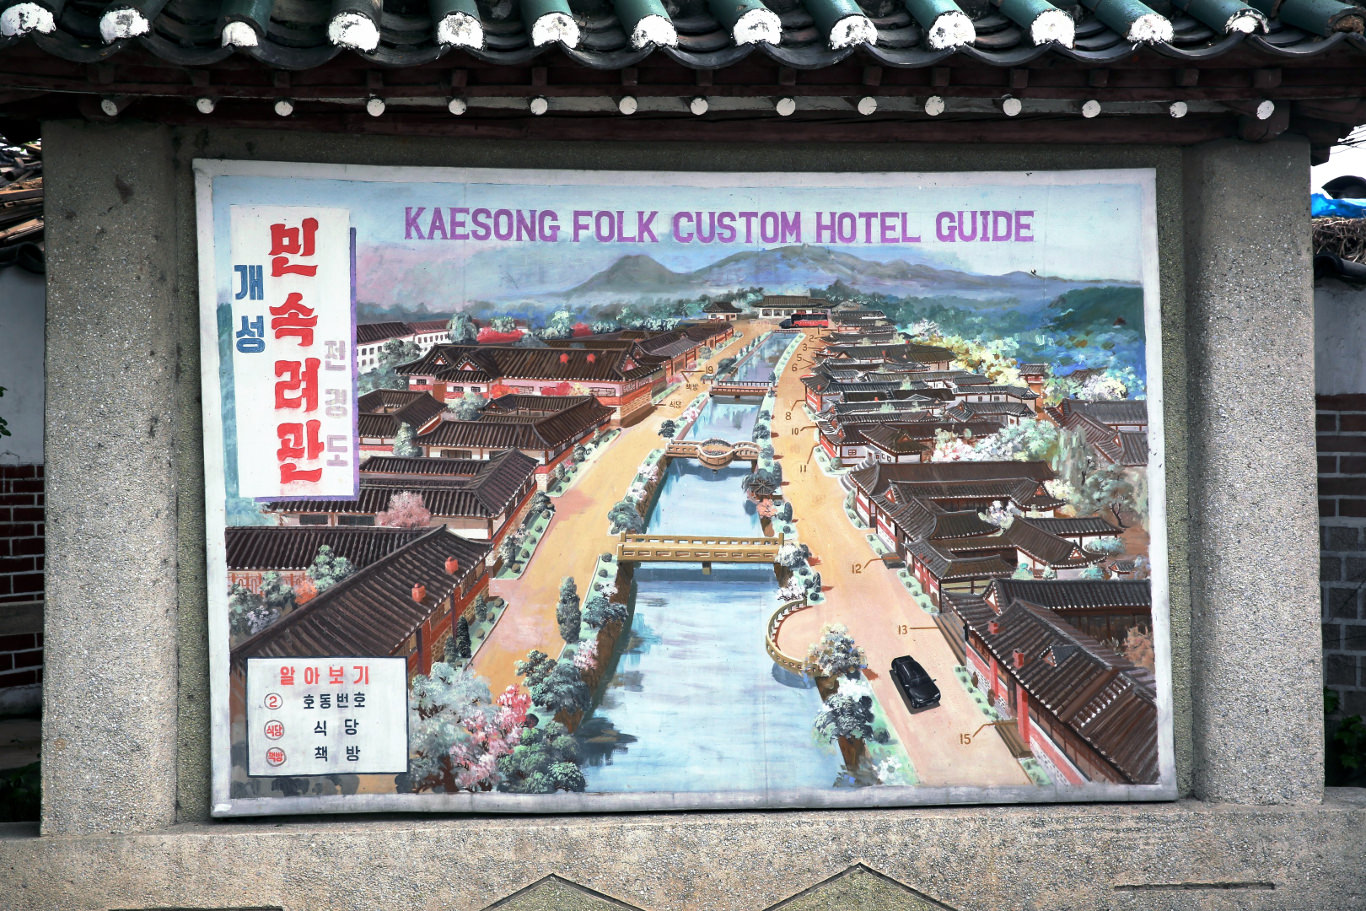 Map of the Folk custom hotel in Kaesong city, North Hwanghae Province, North Korea (DPRK). It is also referred to as the Kaesong Minsok Hotel. Tour arranged by KTG Tours